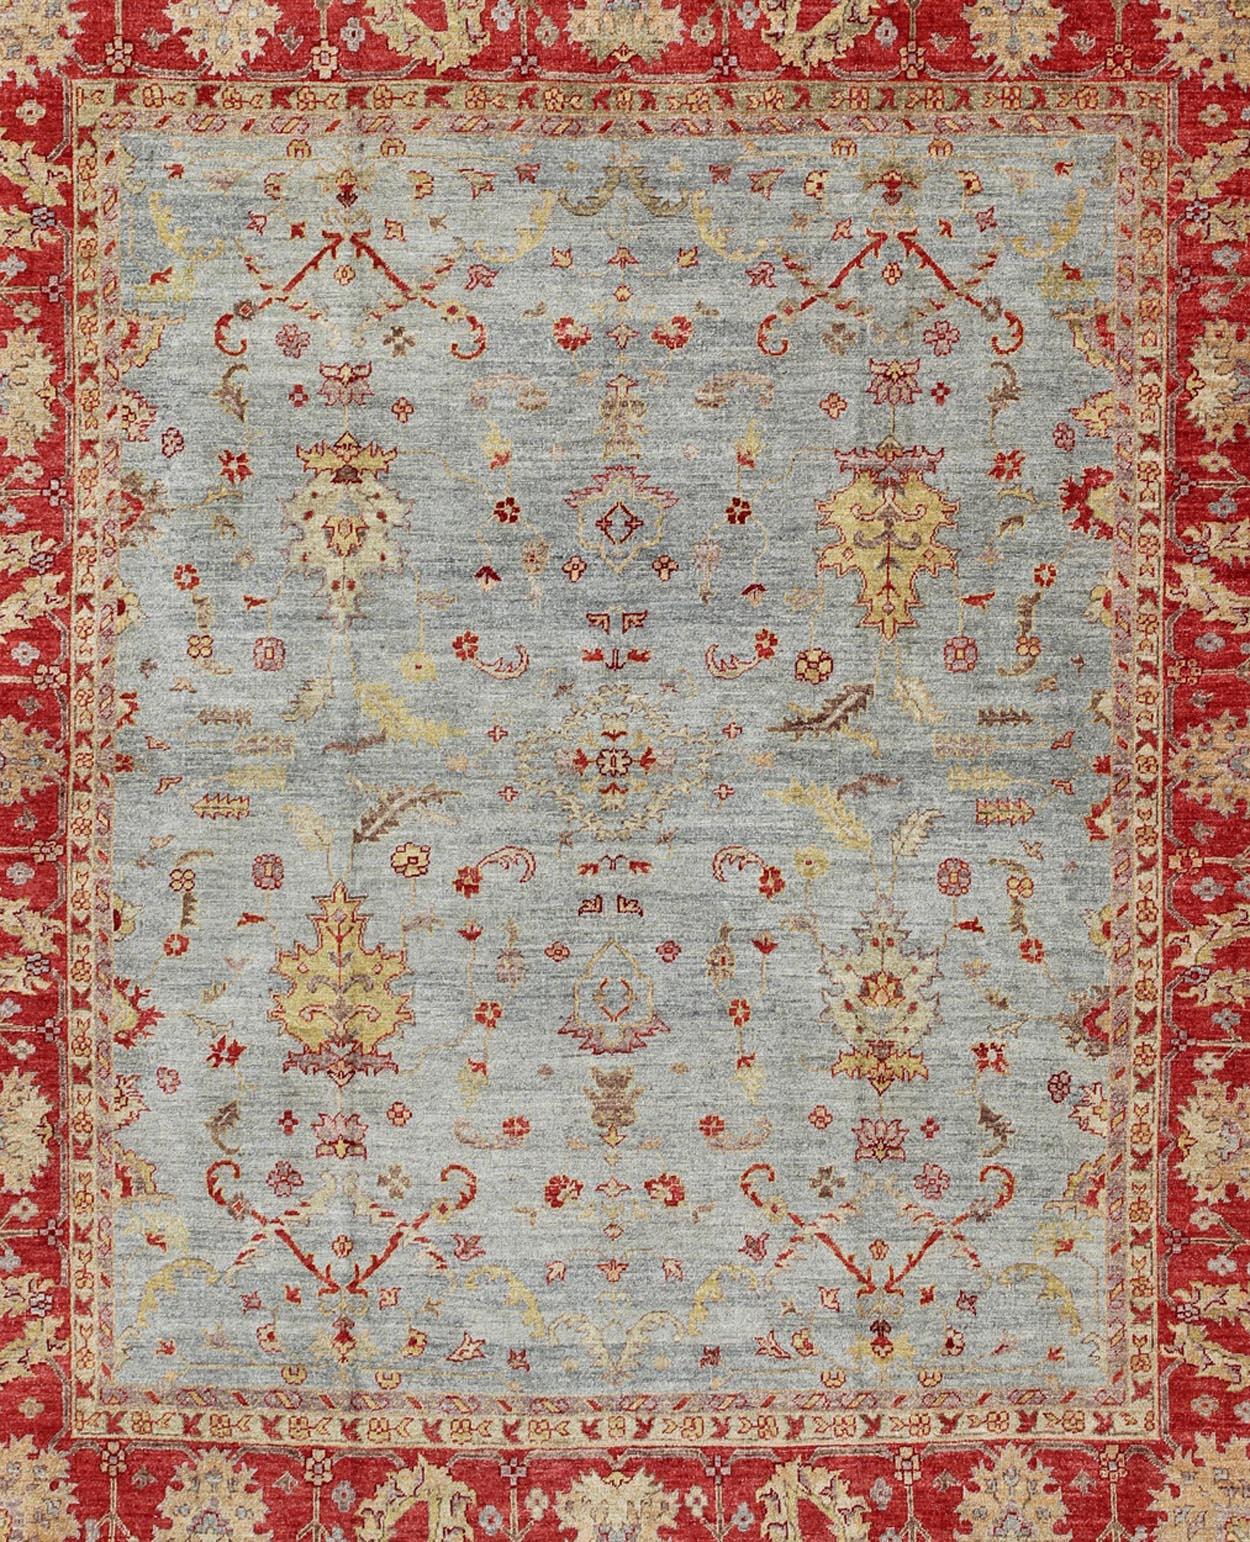 Angora Oushak Large Turkish Rug in Raspberry Red, Light Blue In Excellent Condition For Sale In Atlanta, GA